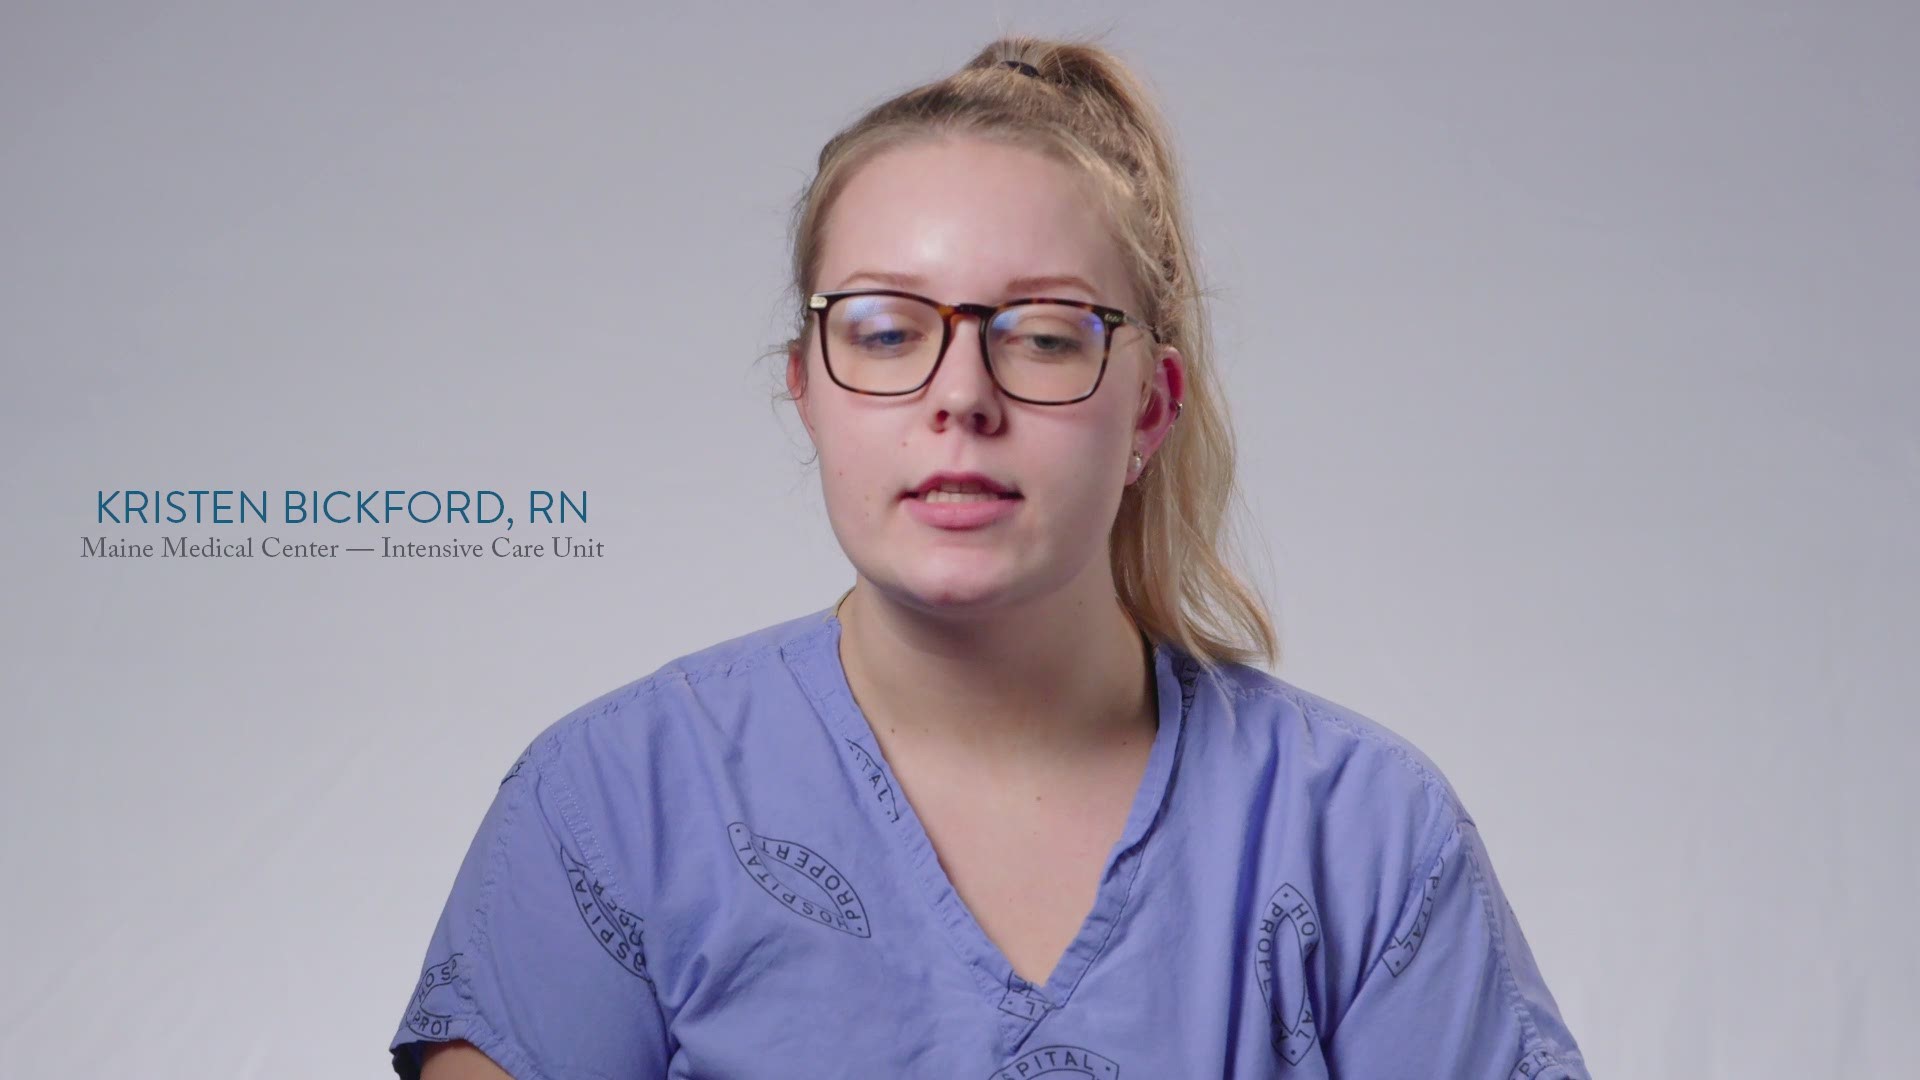 In an emotional video published Tuesday, Maine Medical Center employees gave insight into what they've been experiencing over the past nine to ten months.